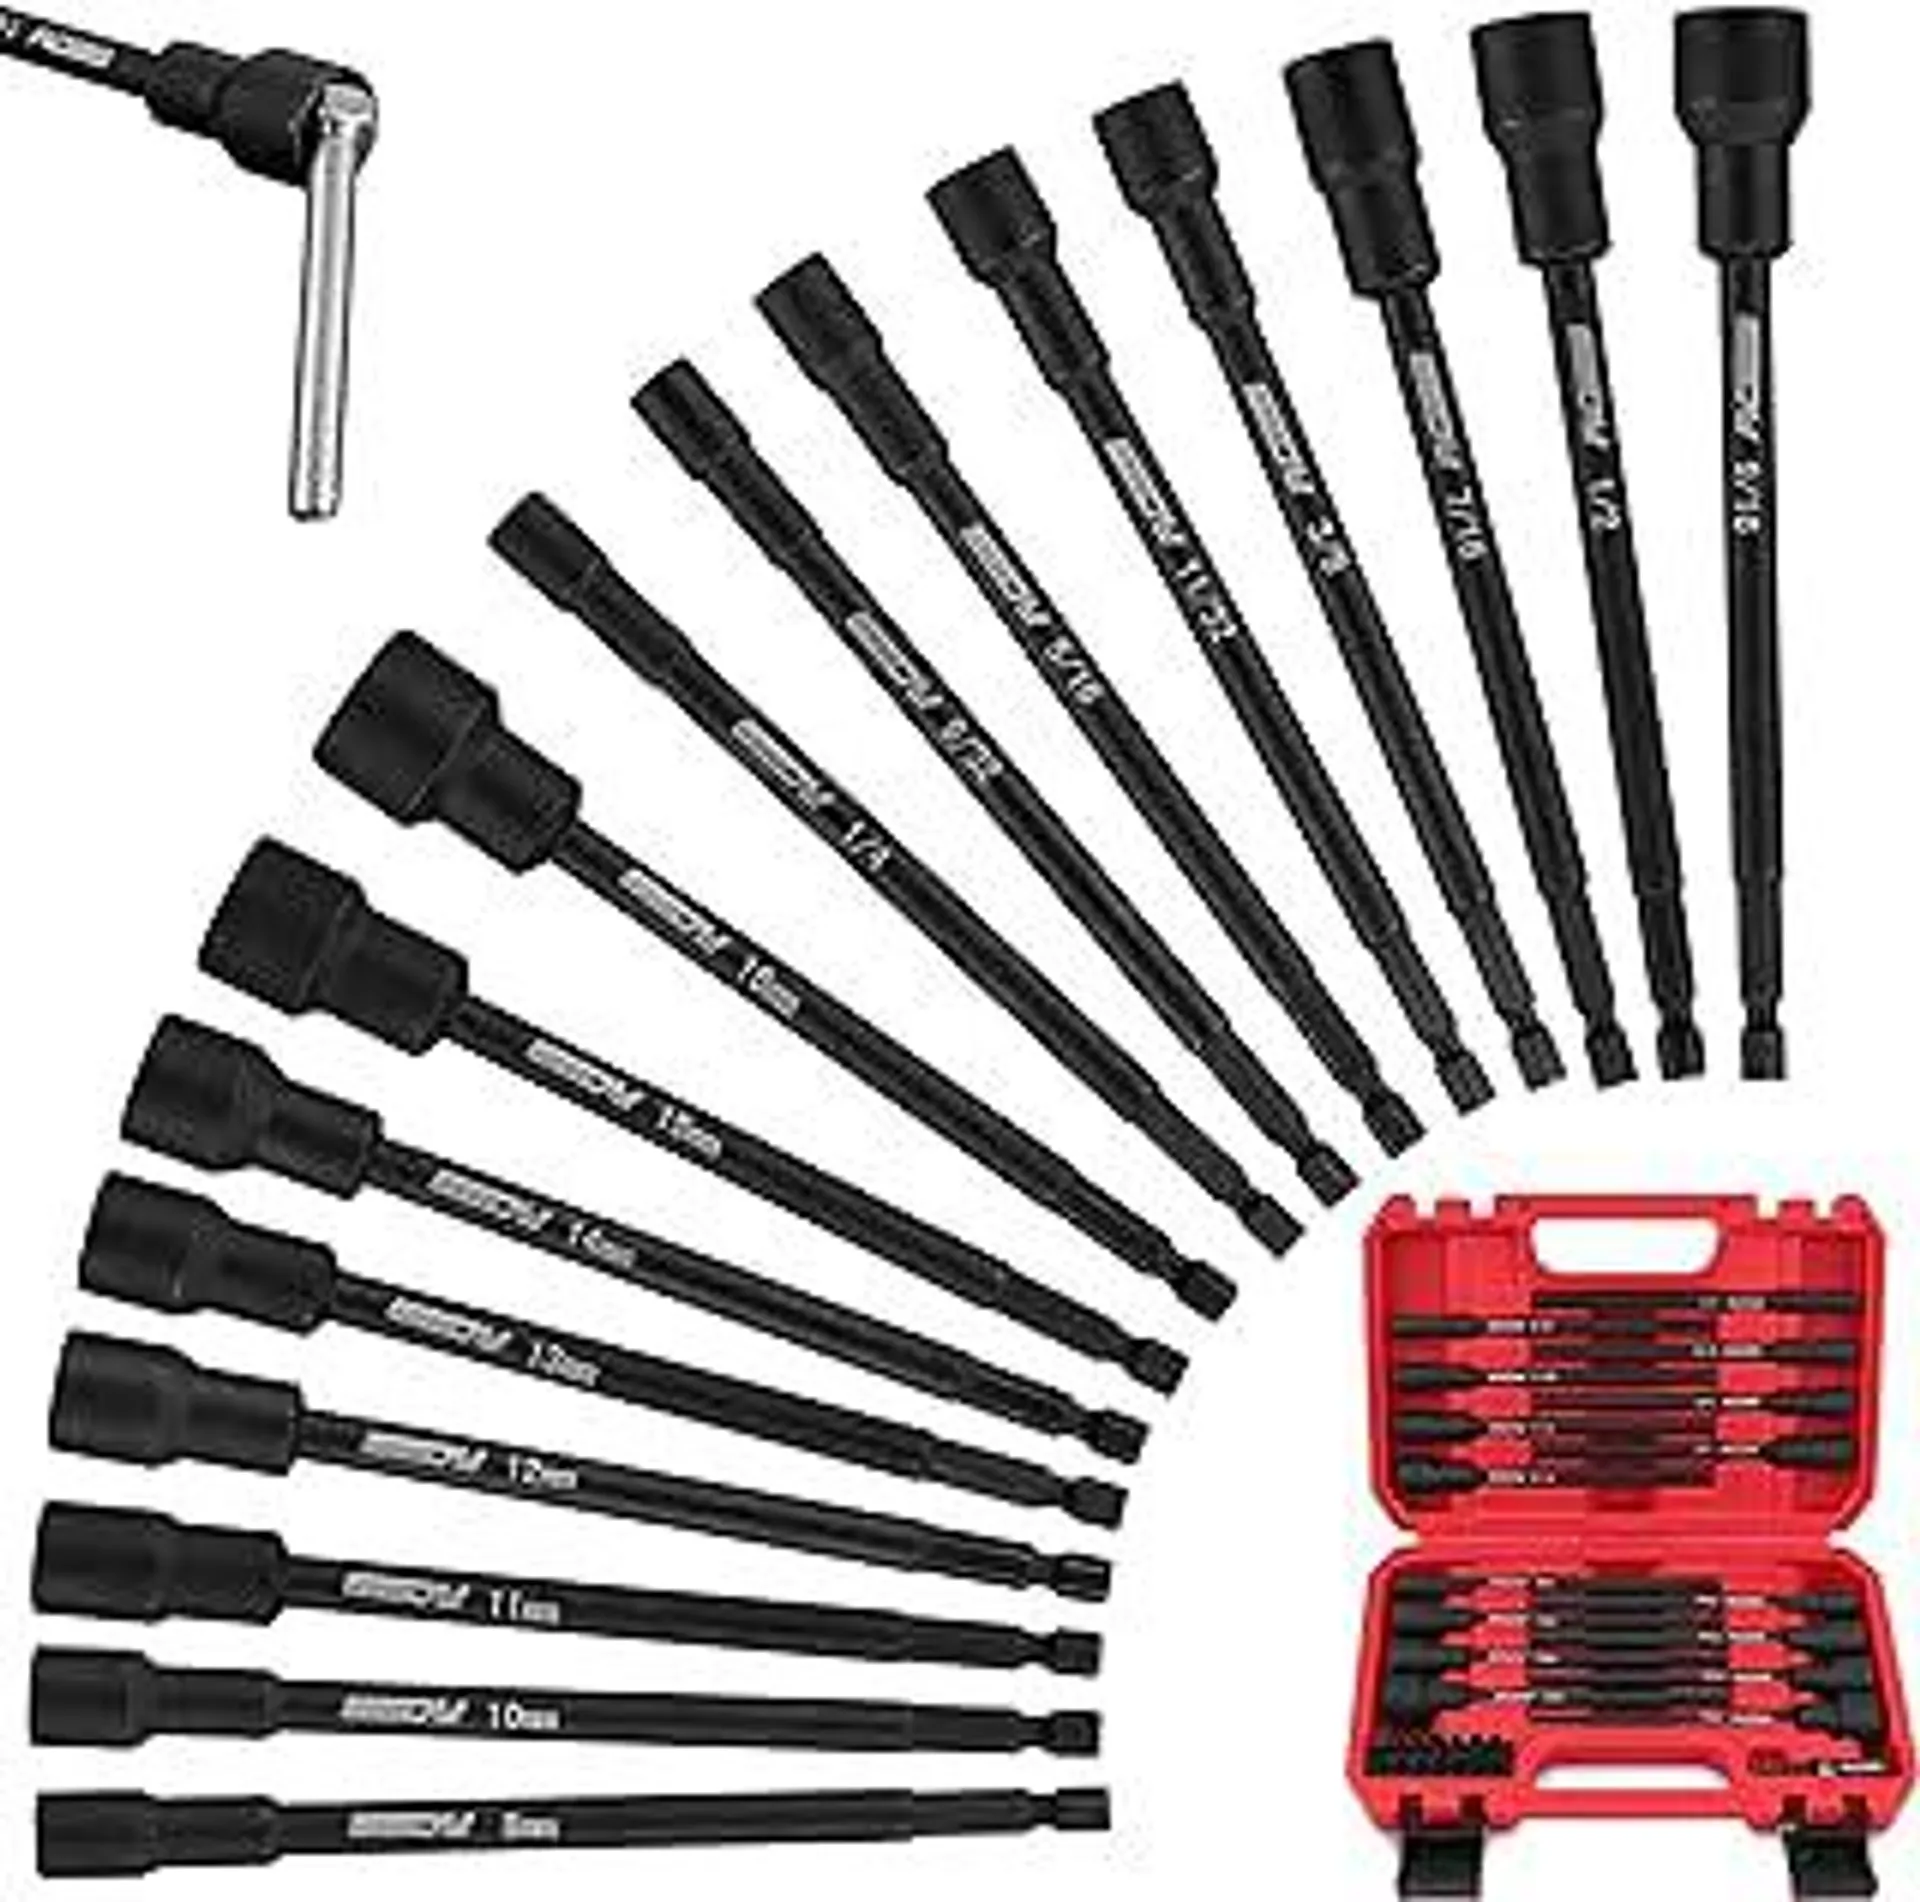 Nut Driver Impact Bit Set - 31-Piece Magnetic Socket Impact Drill Bit Tool Sets Extra Long Hex Nut Setter Driver Holder - Metric SAE Screwdriver Bits 1/4 Drive Shank Adapter Extension